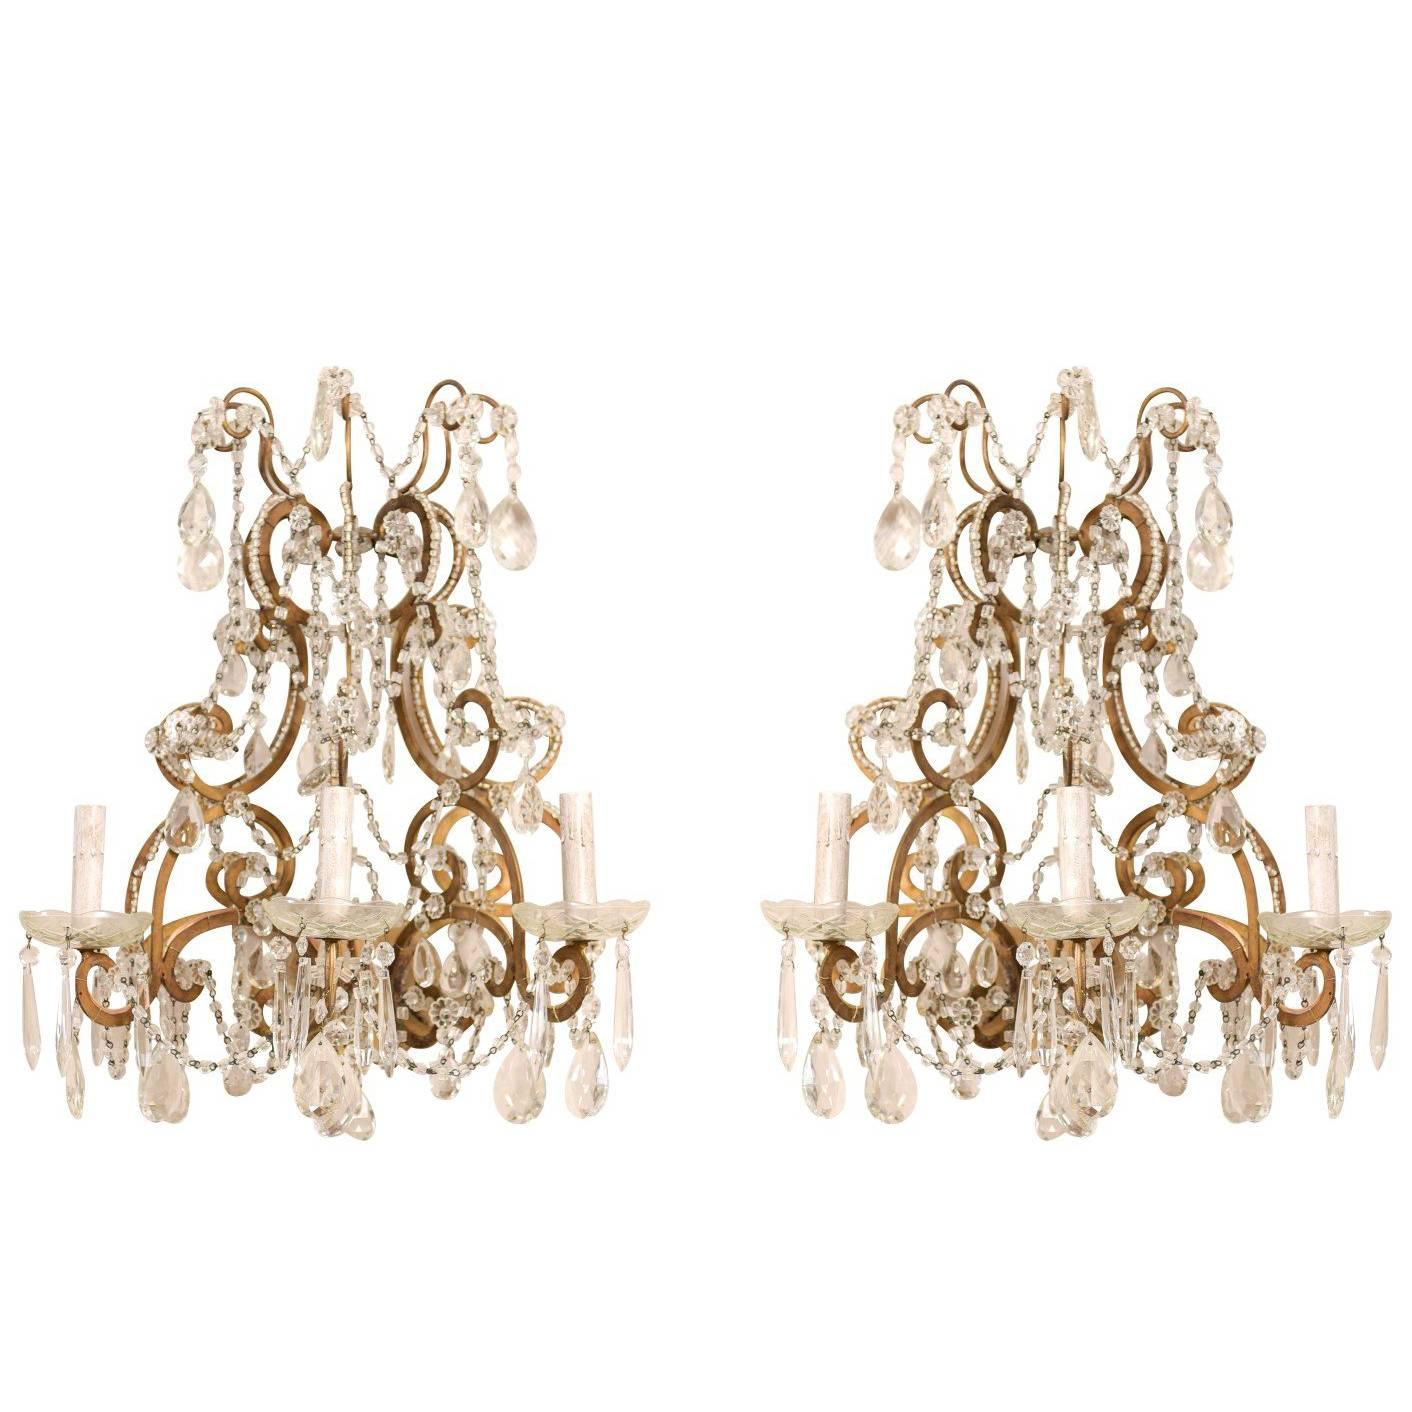 Pair of Elegant Italian Crystal and Gilded Metal Sconces, Mid-20th Century